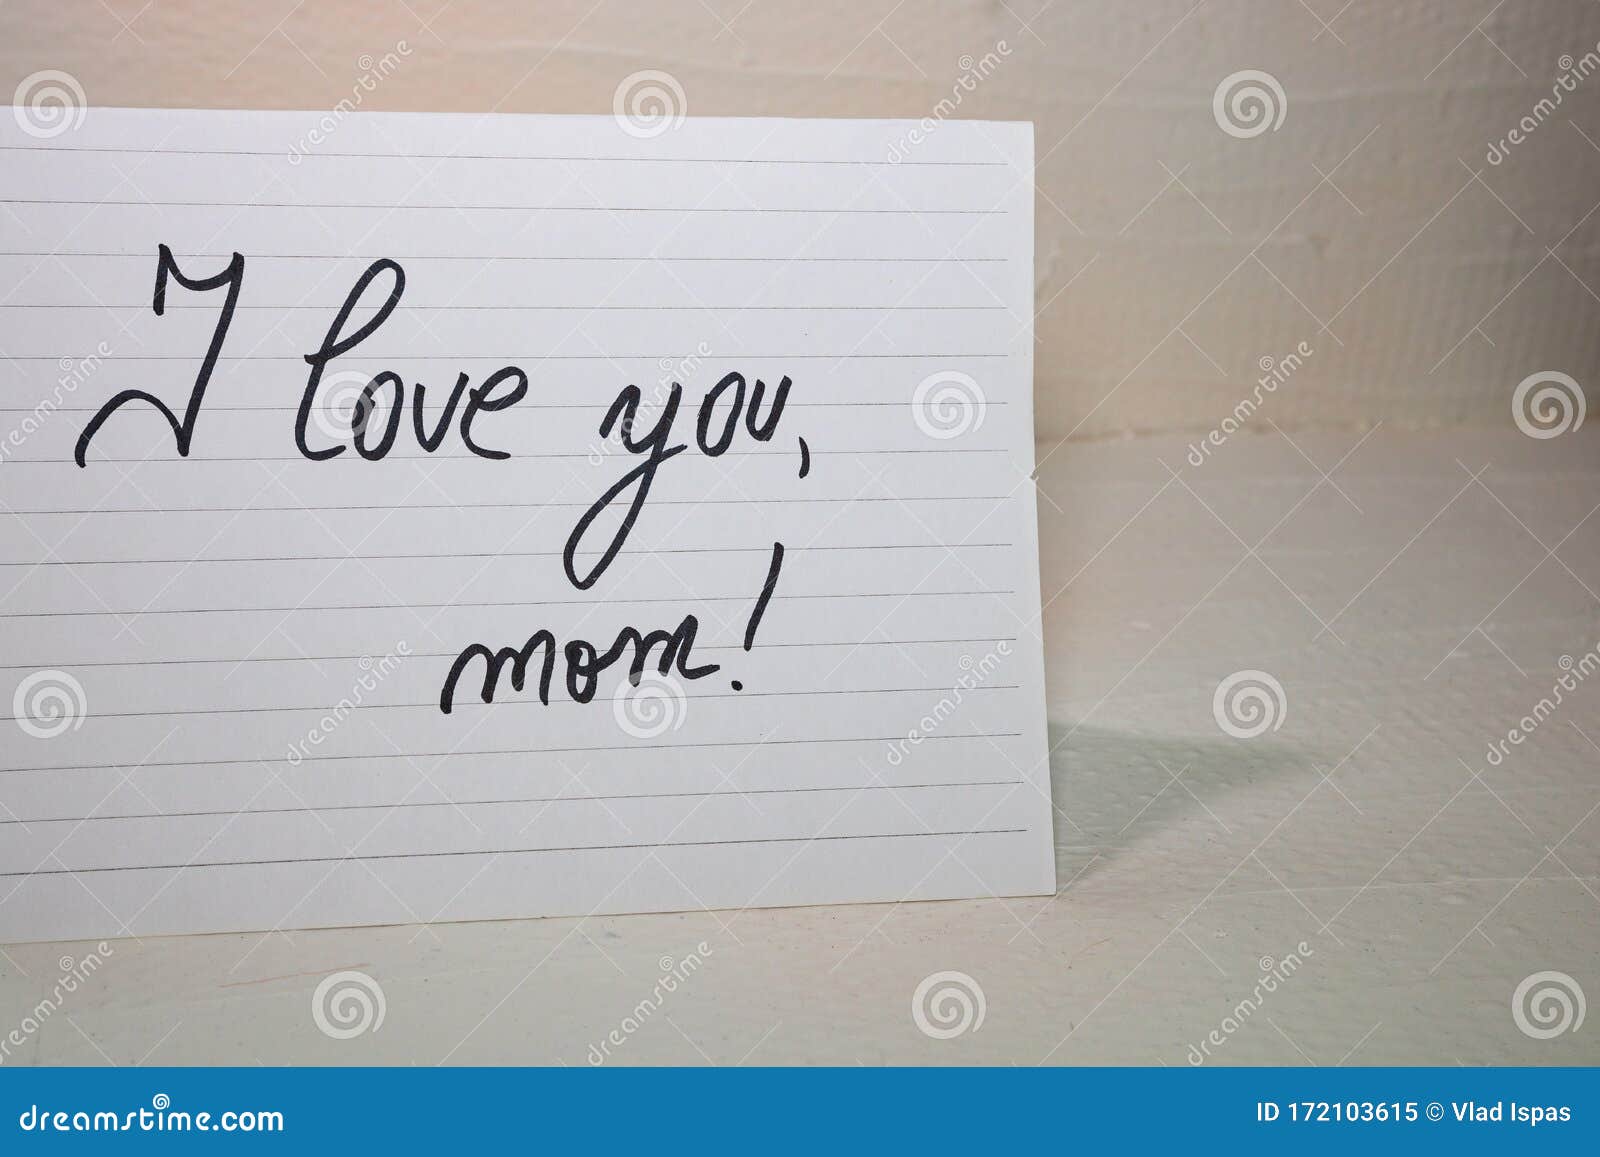 I Love You Mom Writing Love Text for Mother on Paper. Label Tag ...